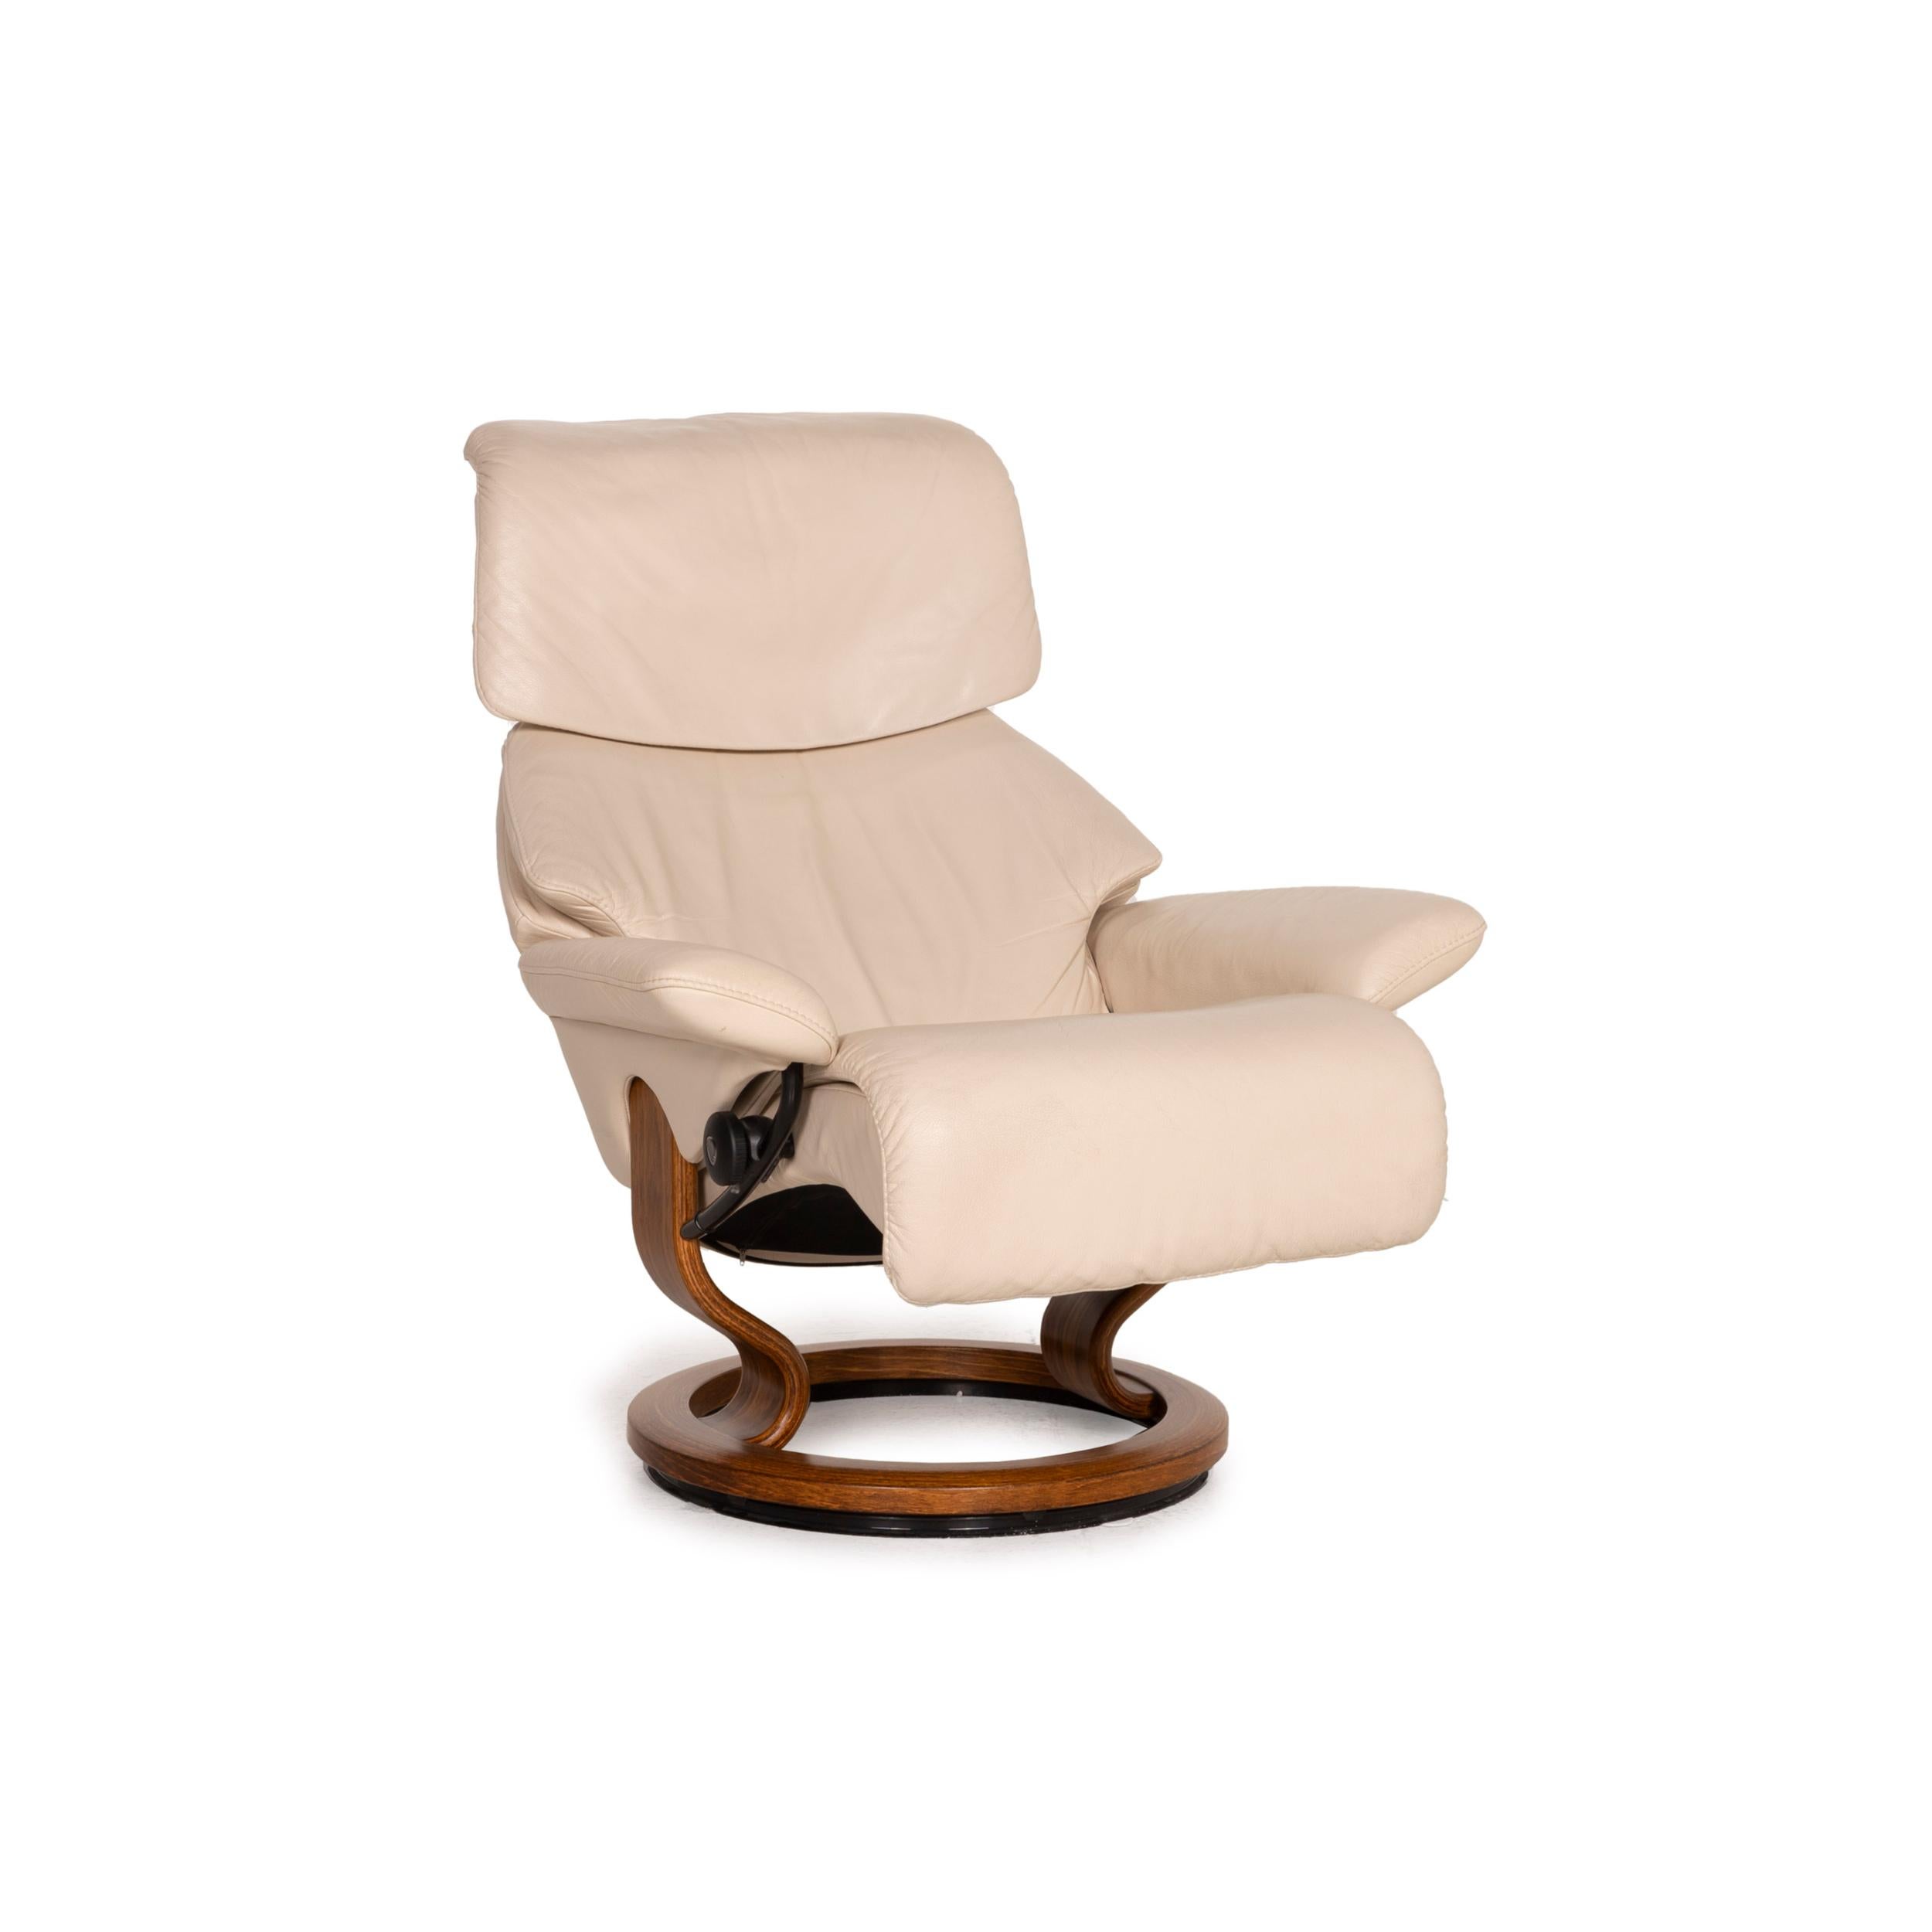 Norwegian Stressless Vision Leather Armchair Cream Incl. Stool Relaxation Function